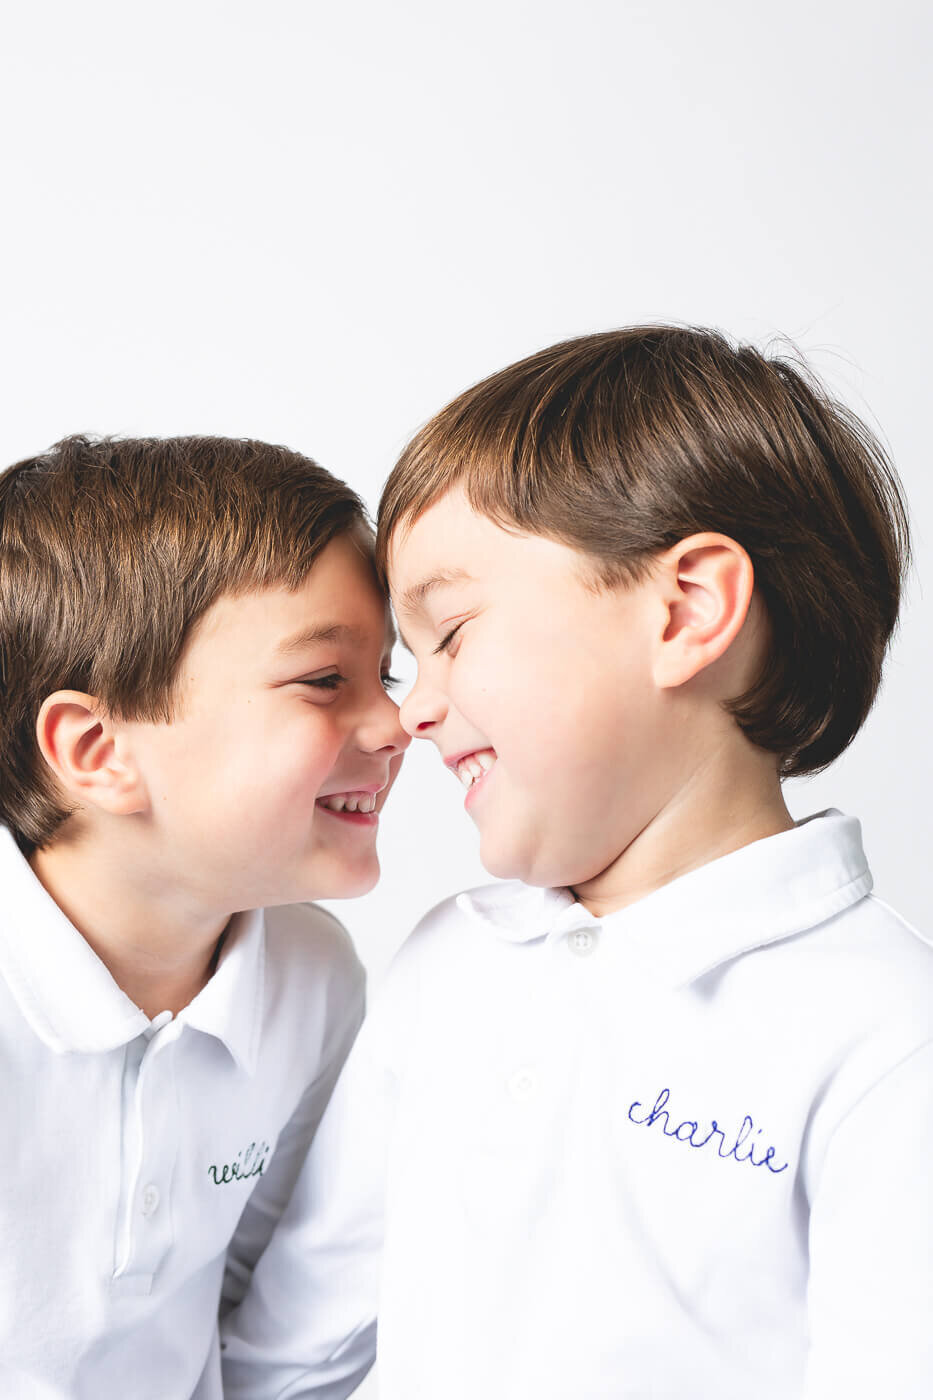 Loving brothers tap their noses together while brightly smiling